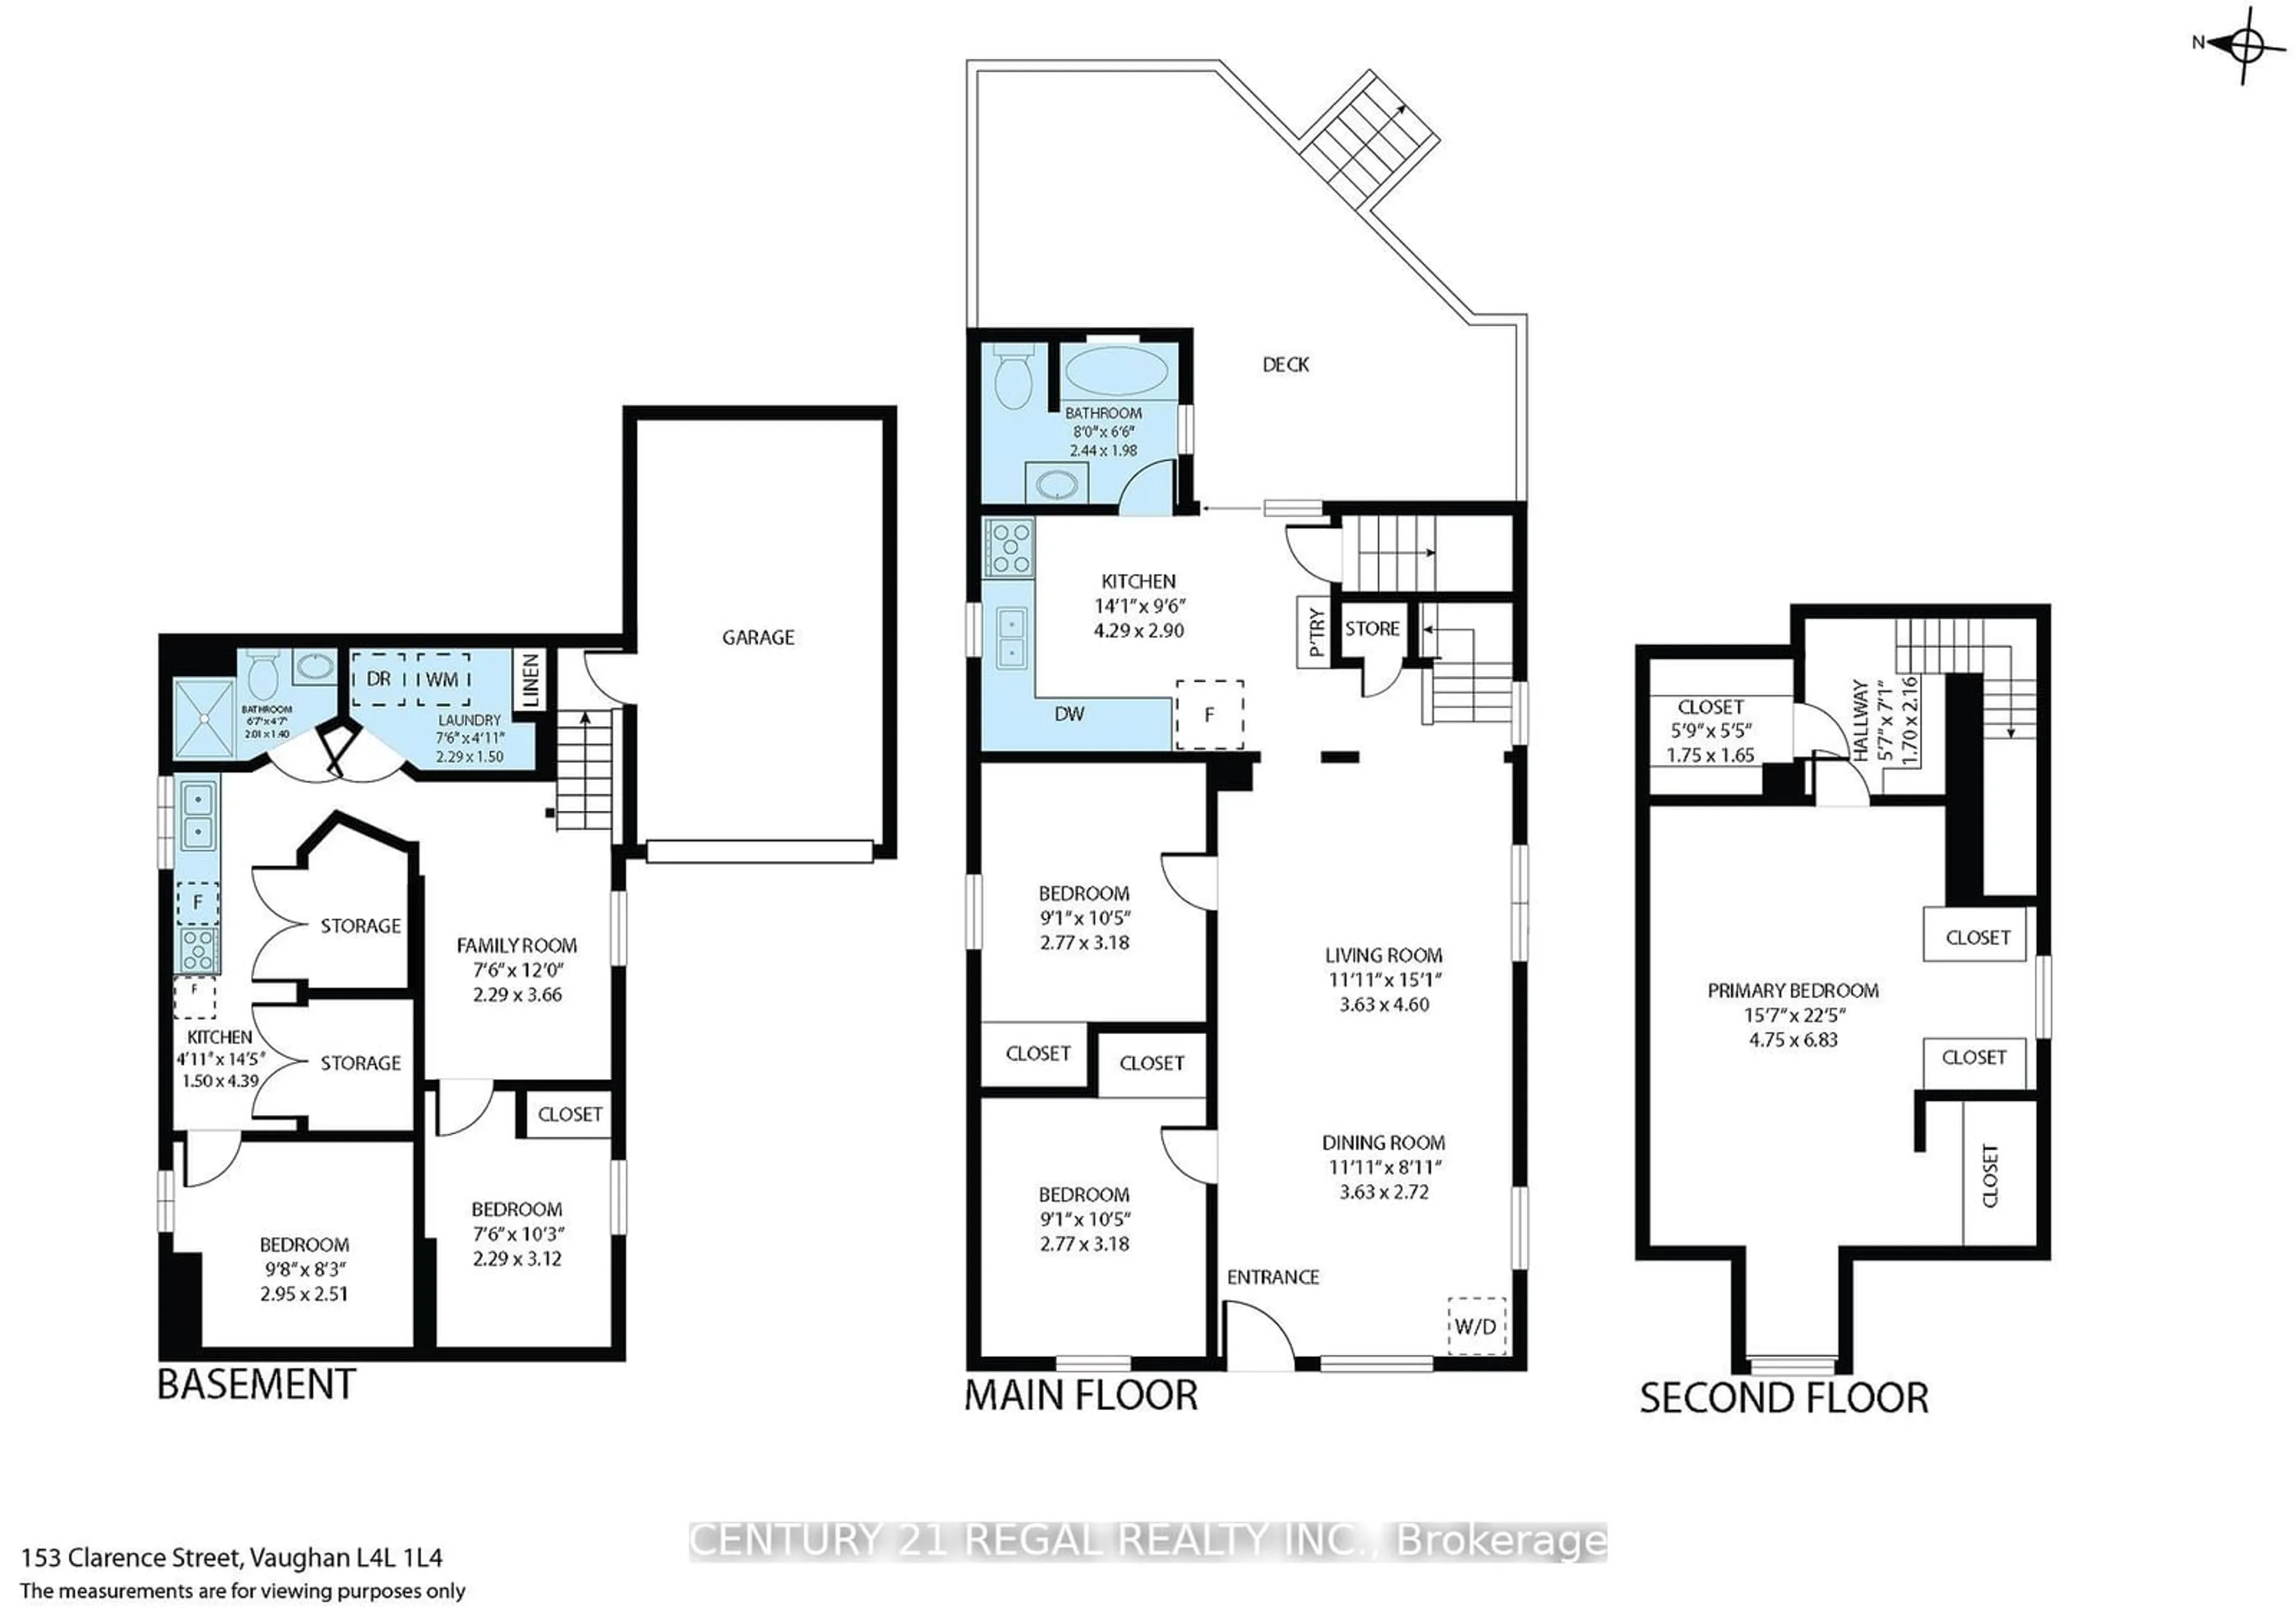 Floor plan for 153 Clarence St, Vaughan Ontario L4L 1L4